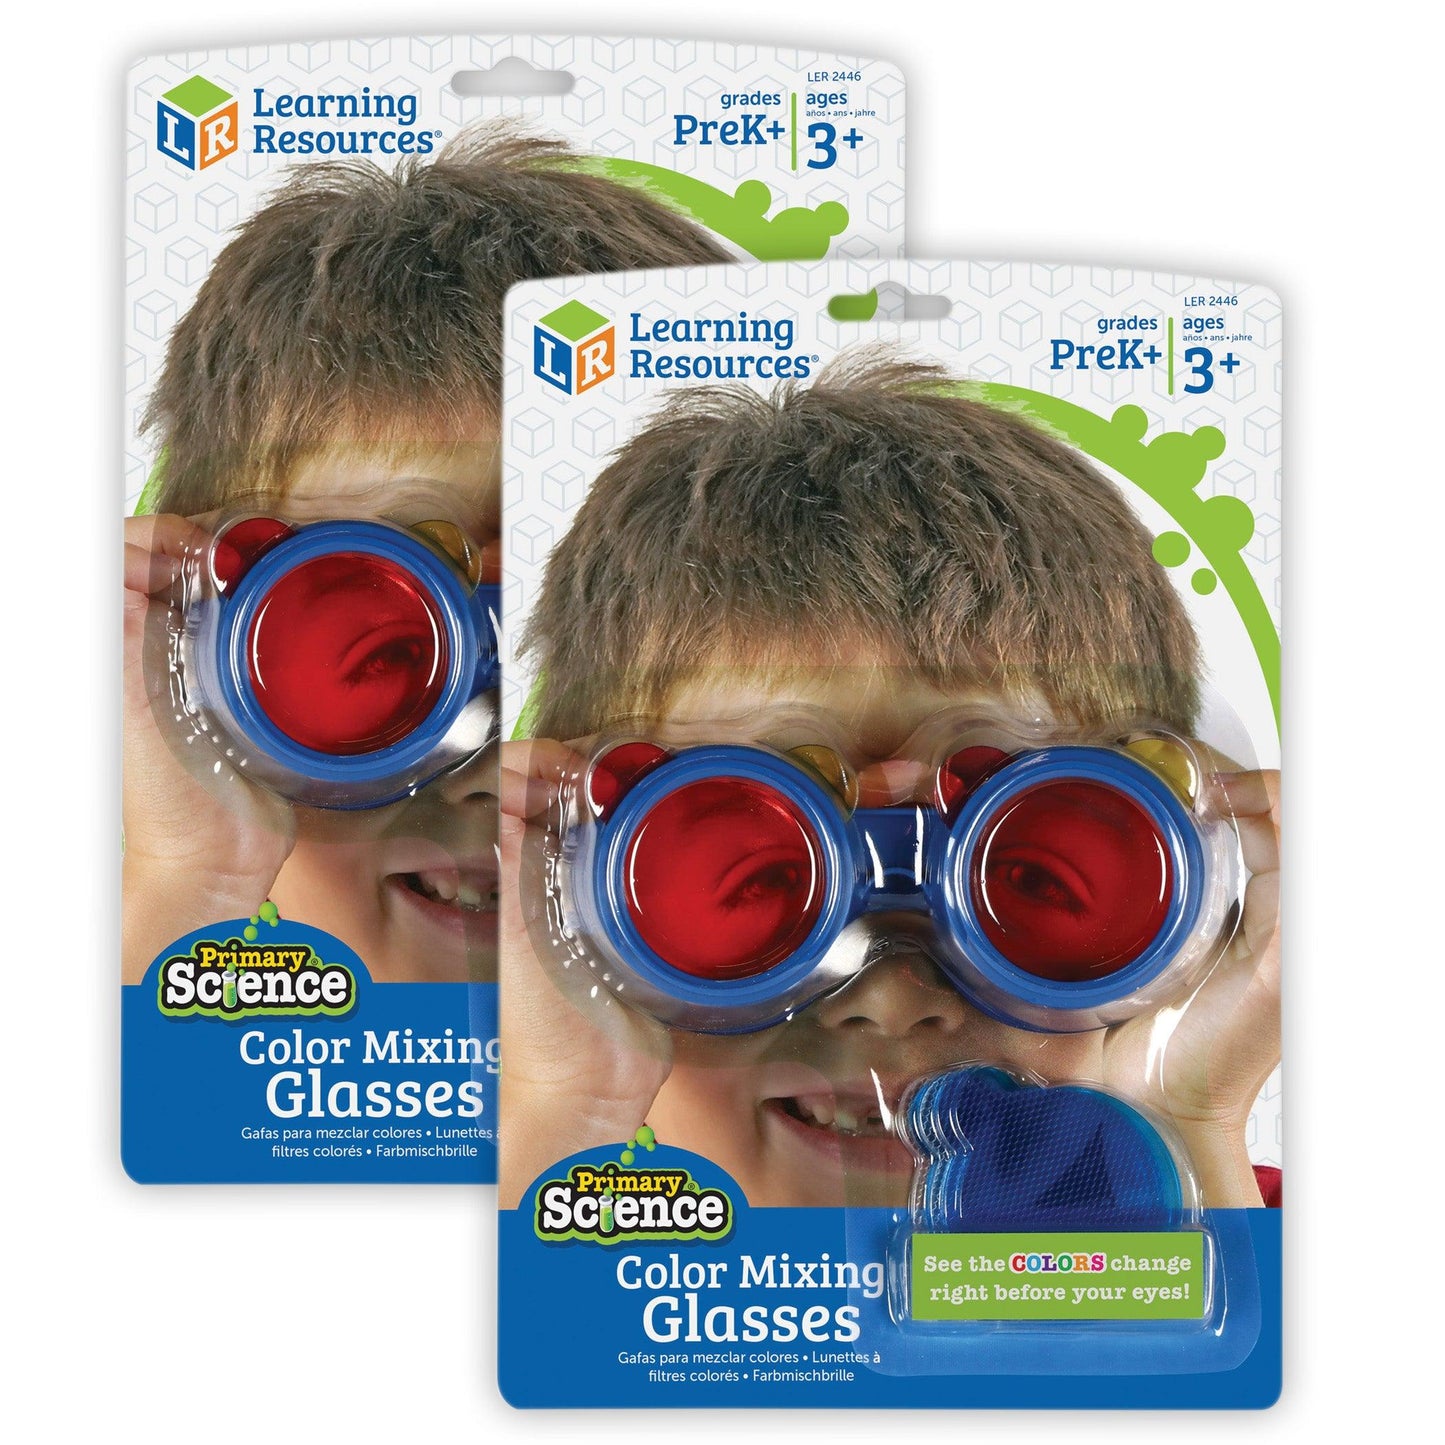 Primary Science Color Mixing Glasses, Pack of 2 - Loomini